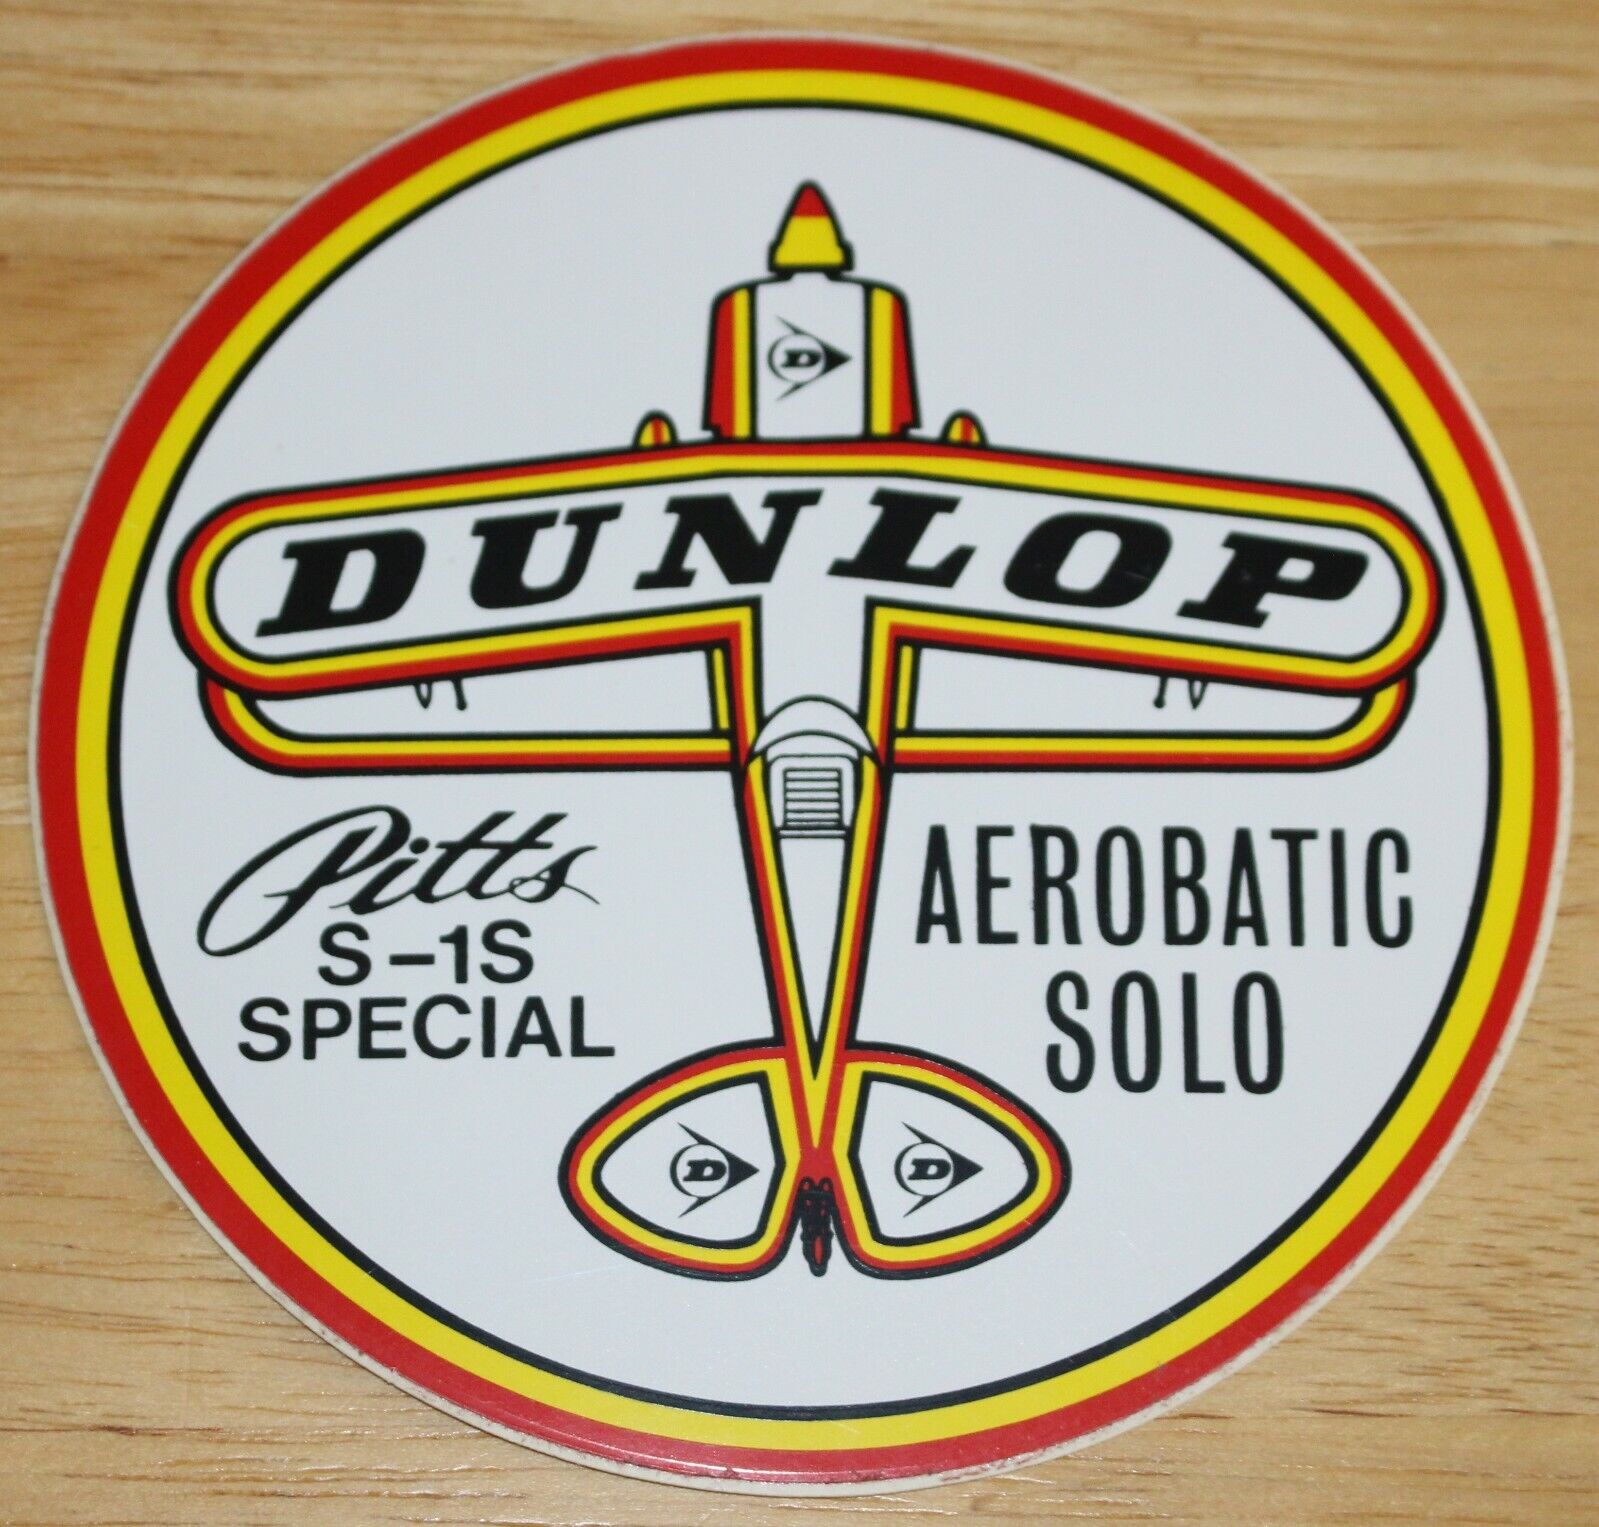 Dunlop Pitts S-1S Special Aerobatic Solo Display Team (UK) Sticker